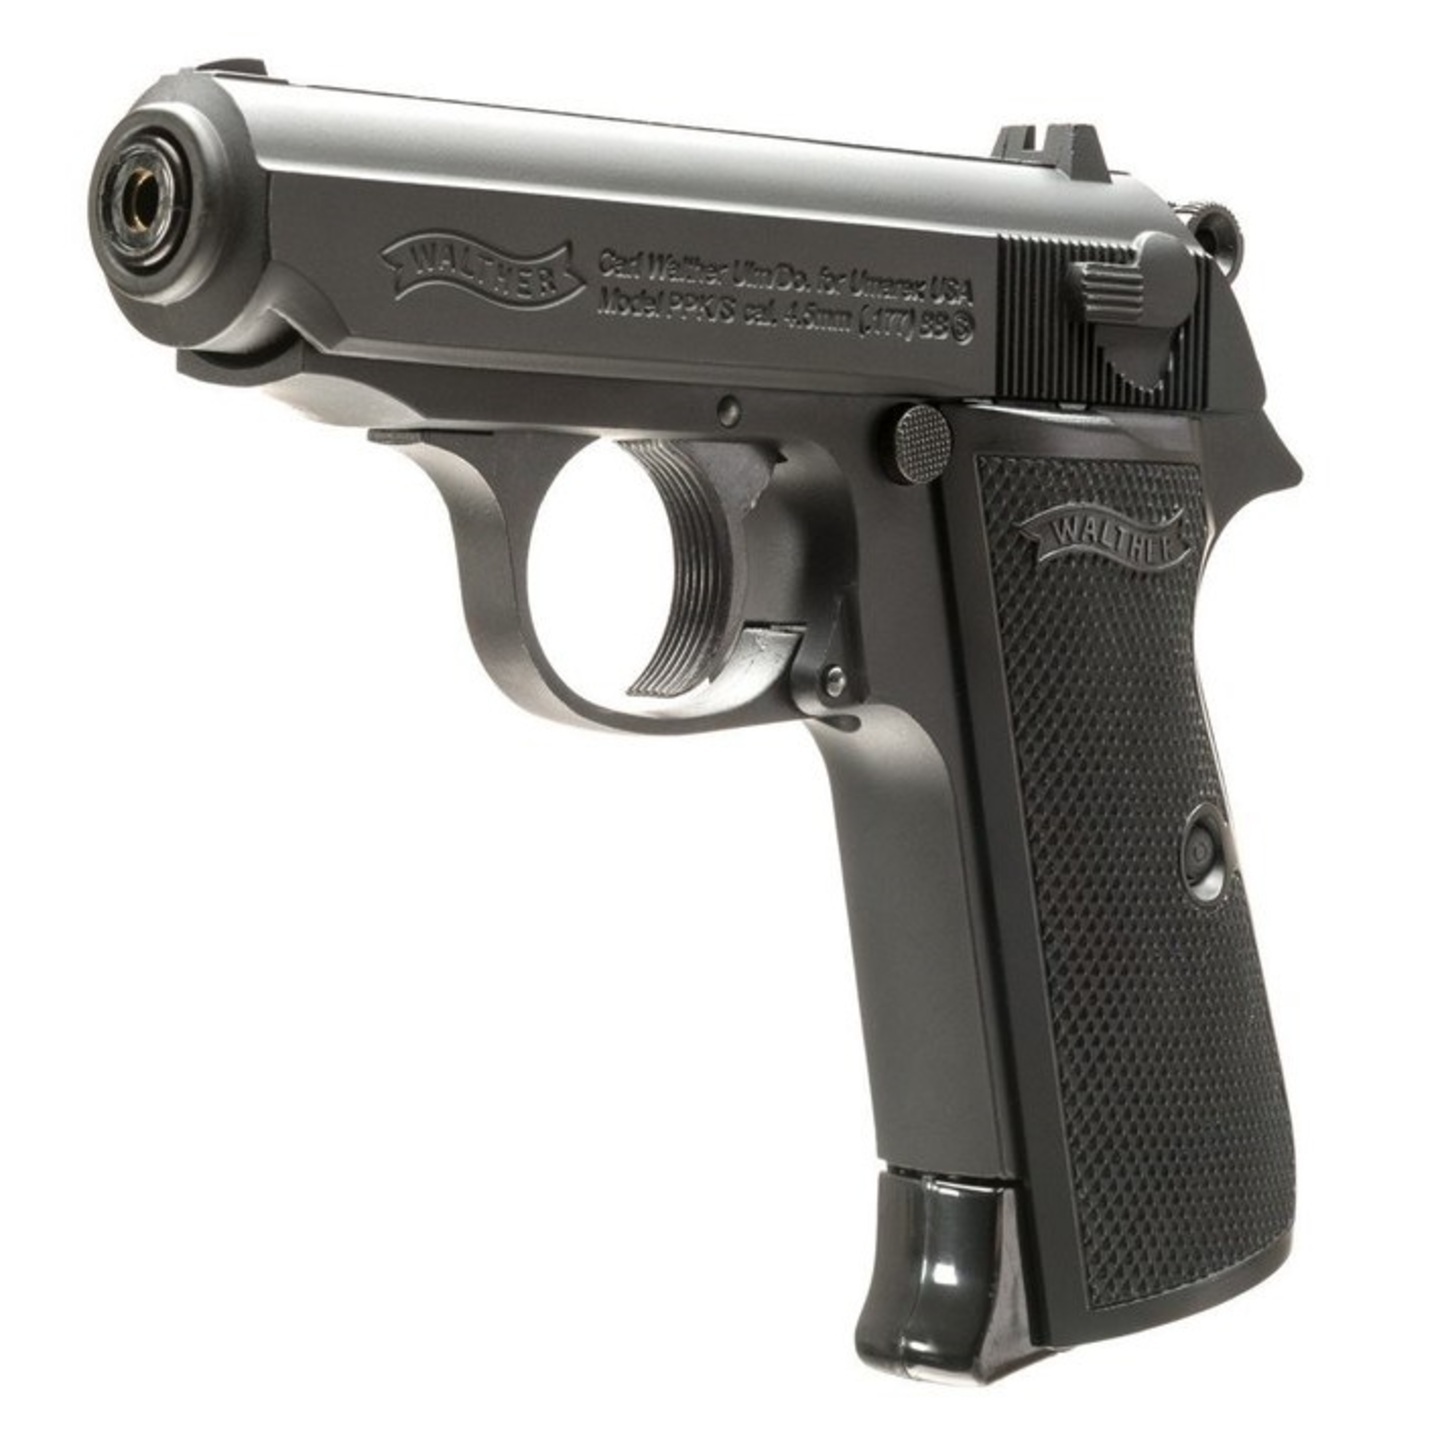 Umarex James Bond Walther PPKs CO2 Pistol 4.5 MM .177 BB with 500 BBs and 3 CO2 Cylinder